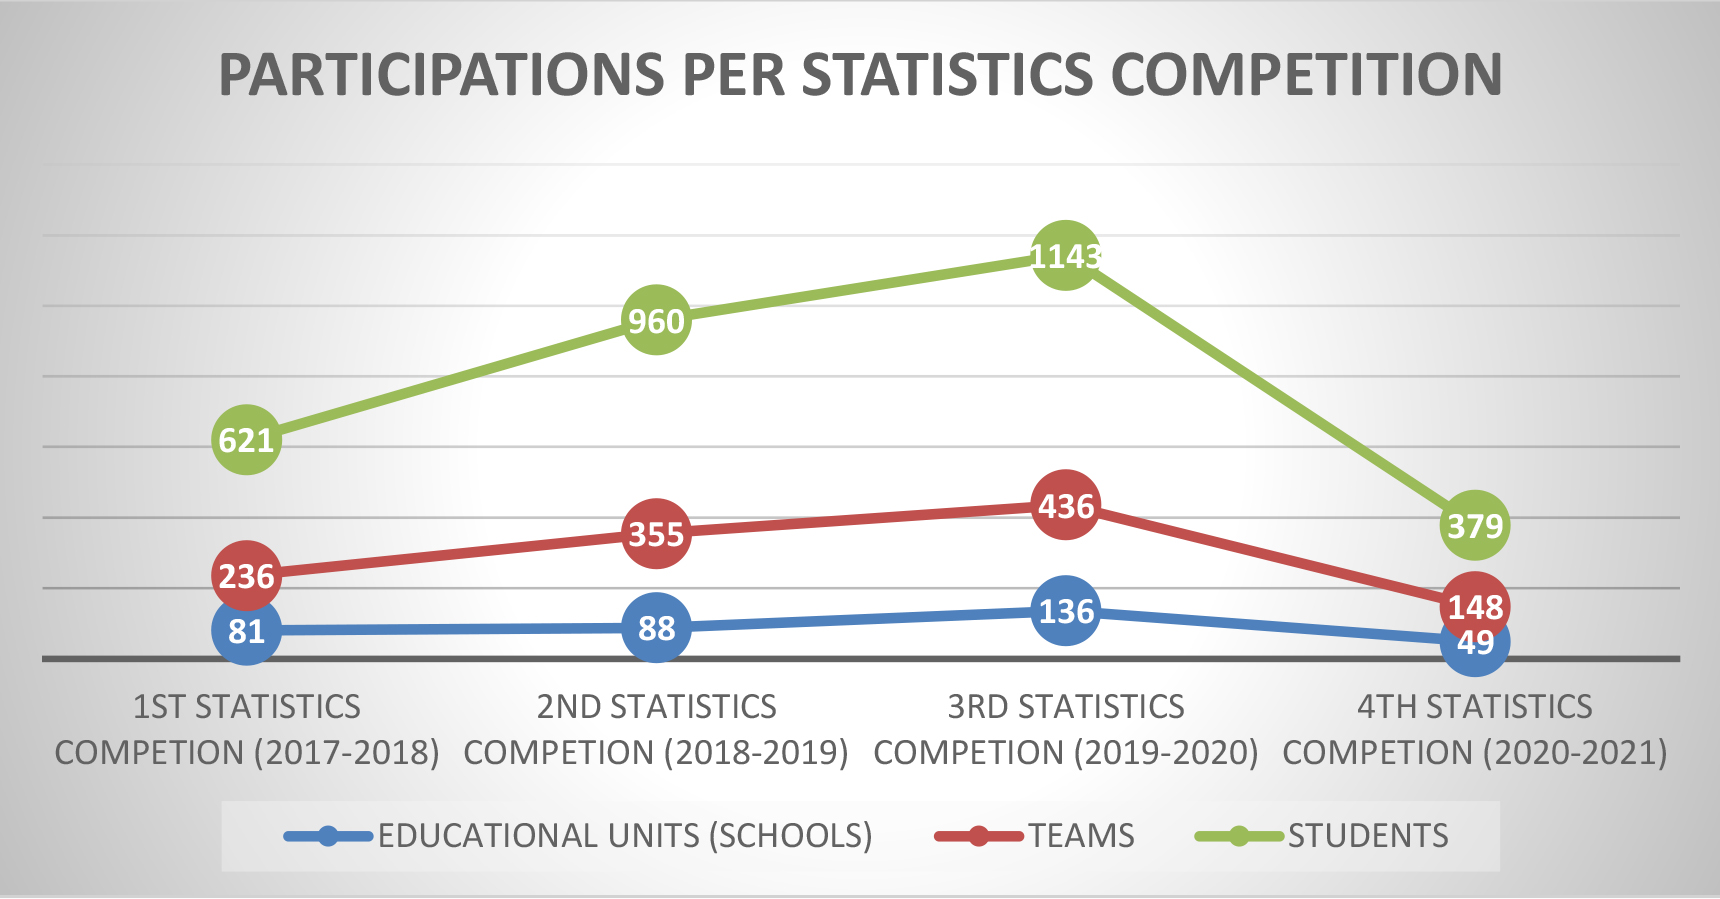 Participations per Greek Nationwide Statistics Competition, in terms of educational units (schools), teams and students.